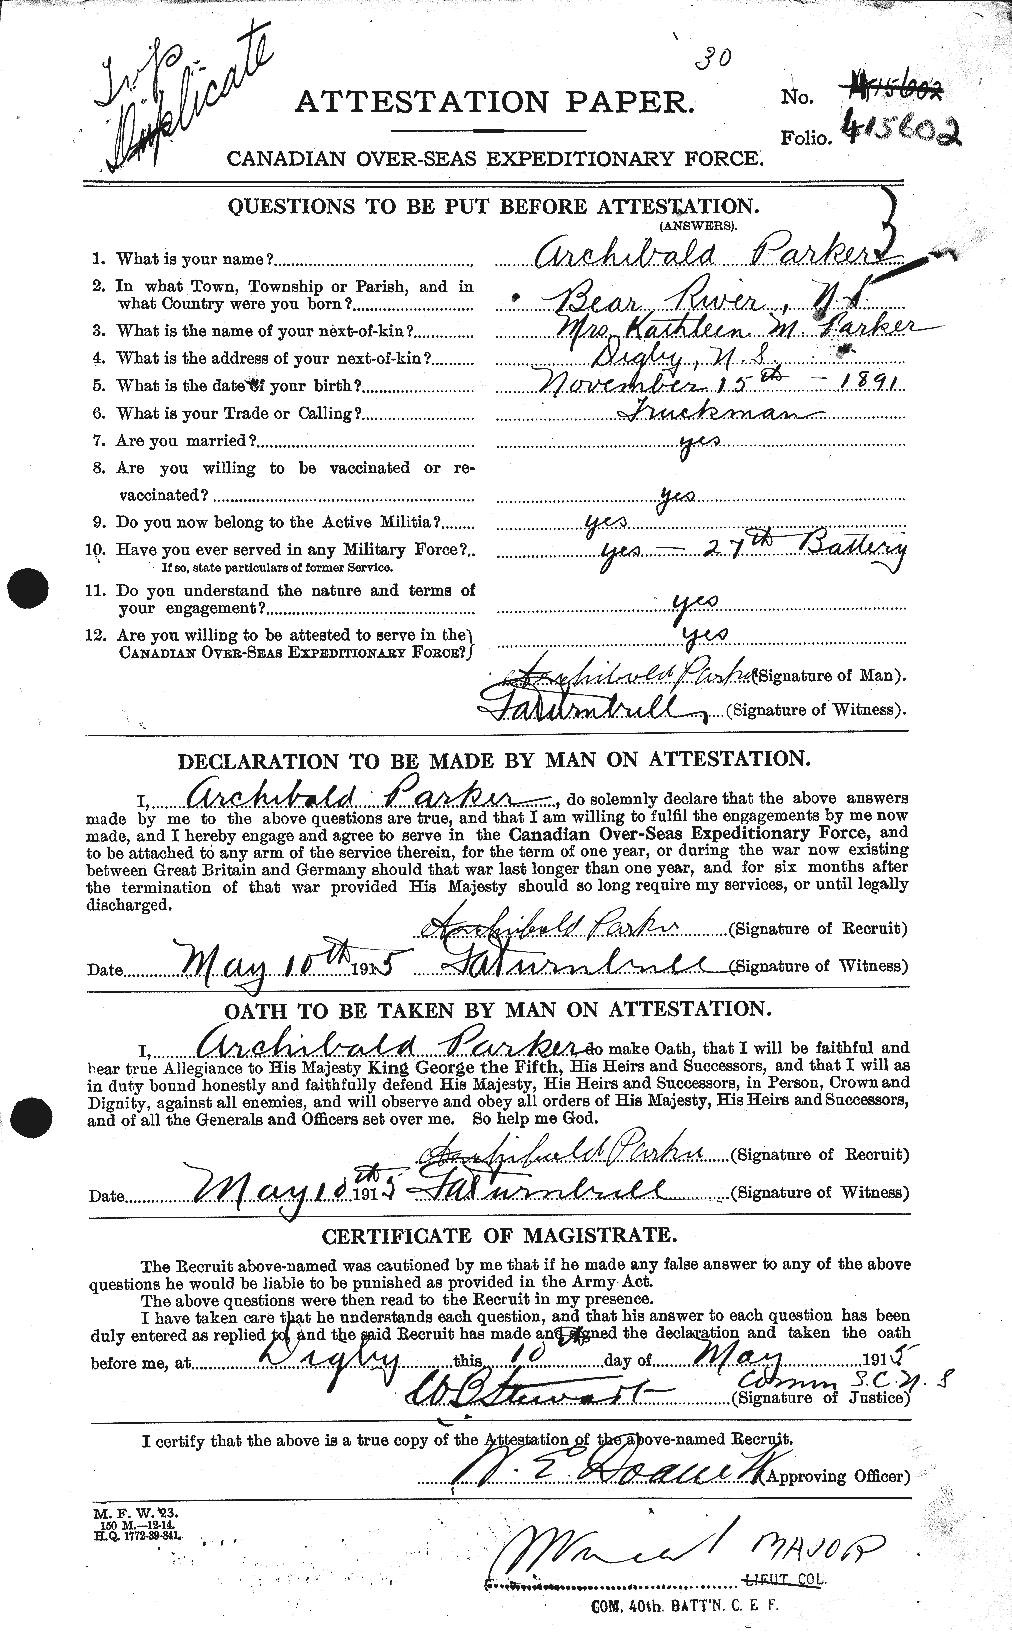 Personnel Records of the First World War - CEF 565002a